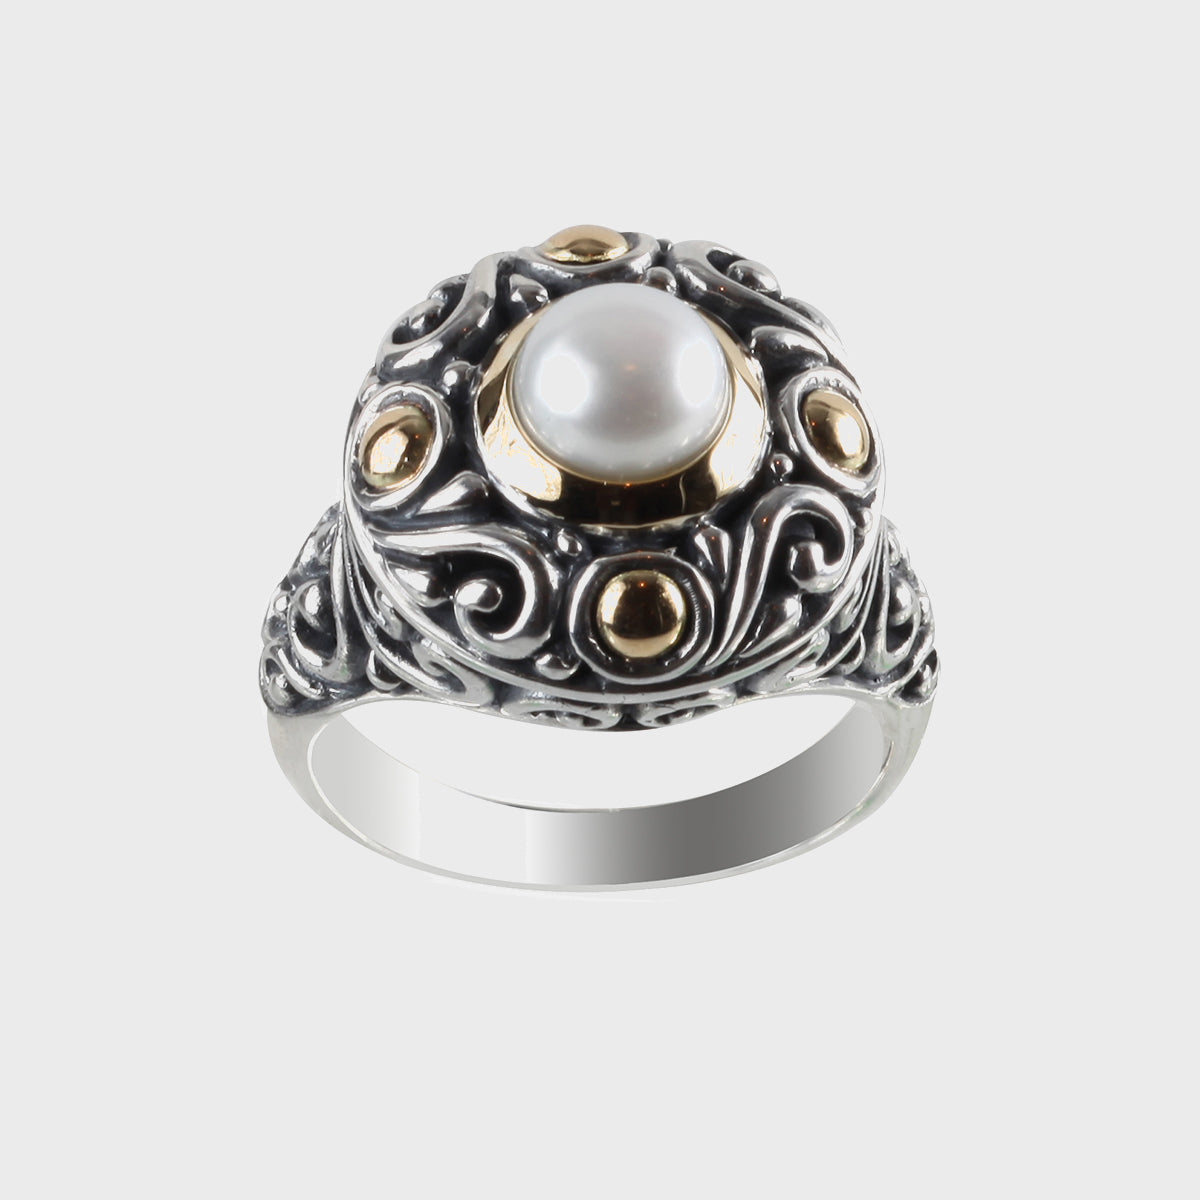 Pearl of Great Price Ring - Size 7